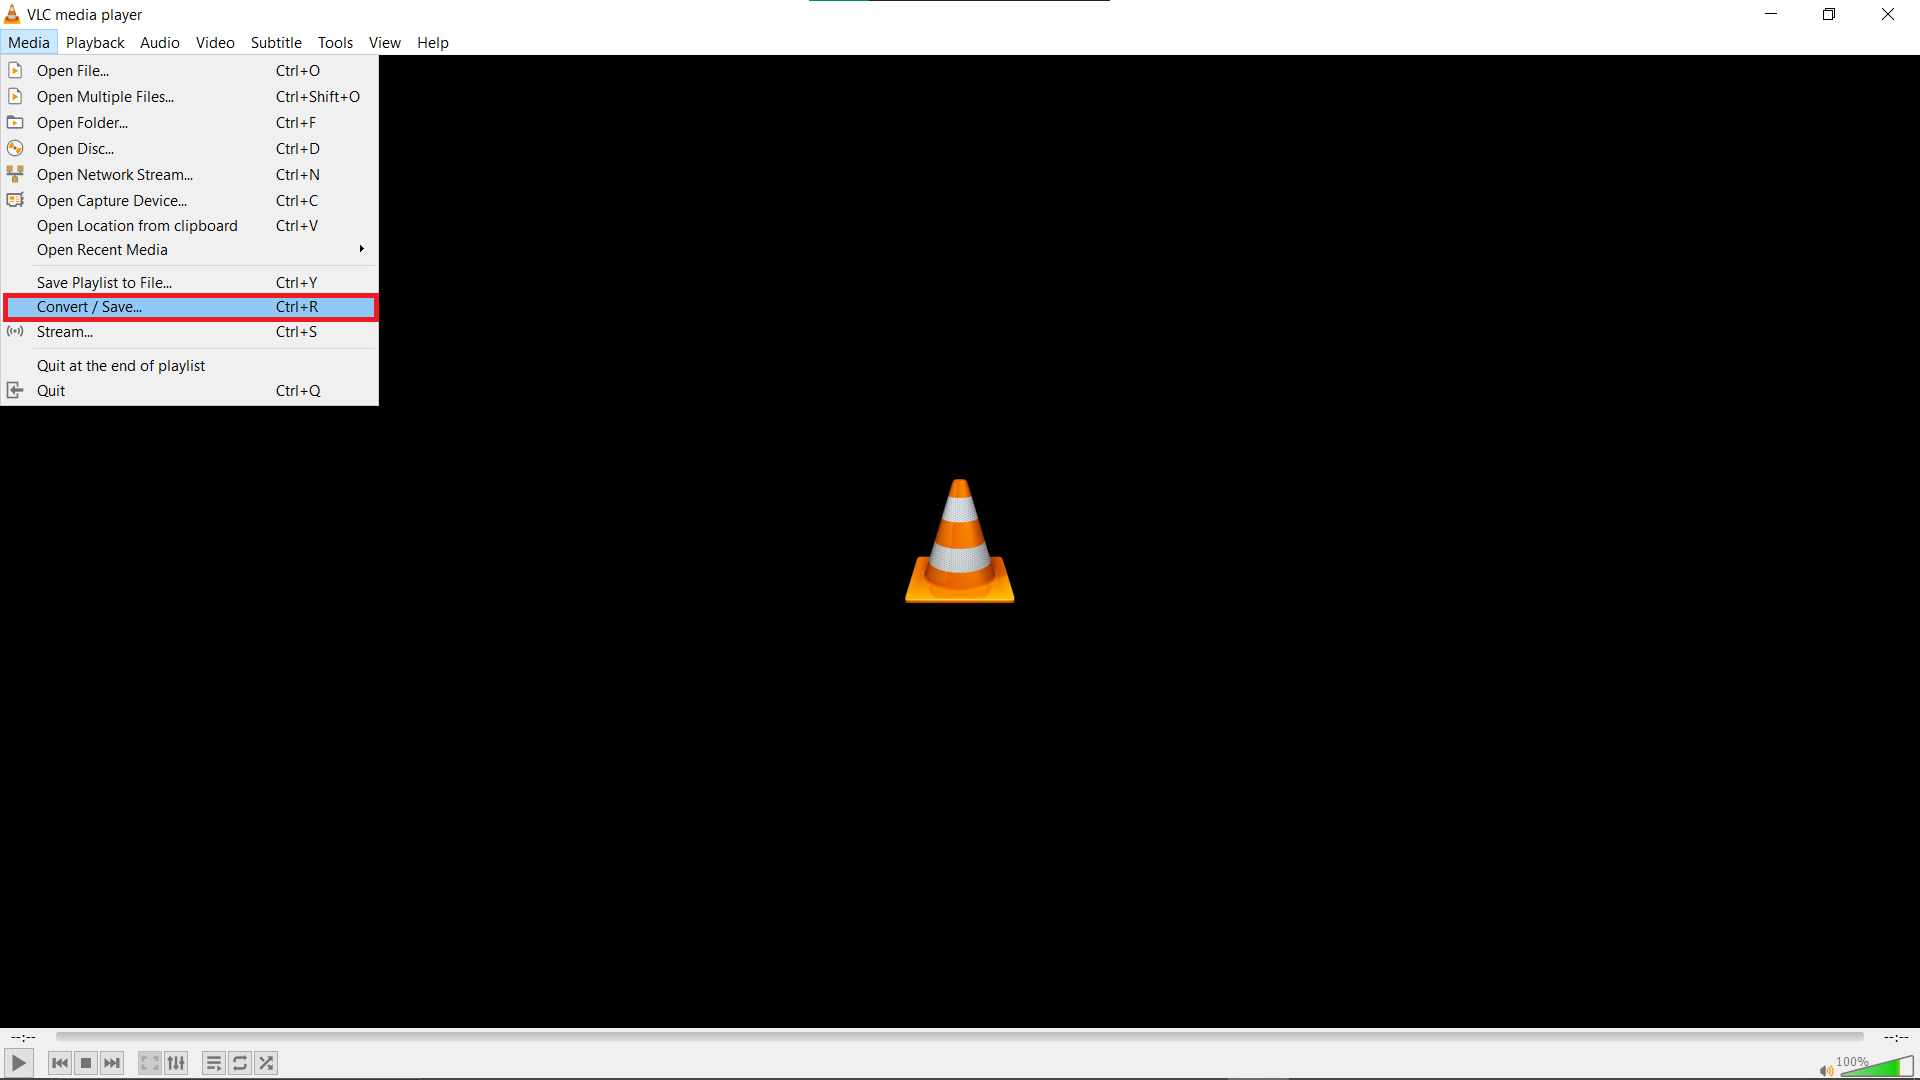 How To Reduce Video Quality Using VLC: Step 2